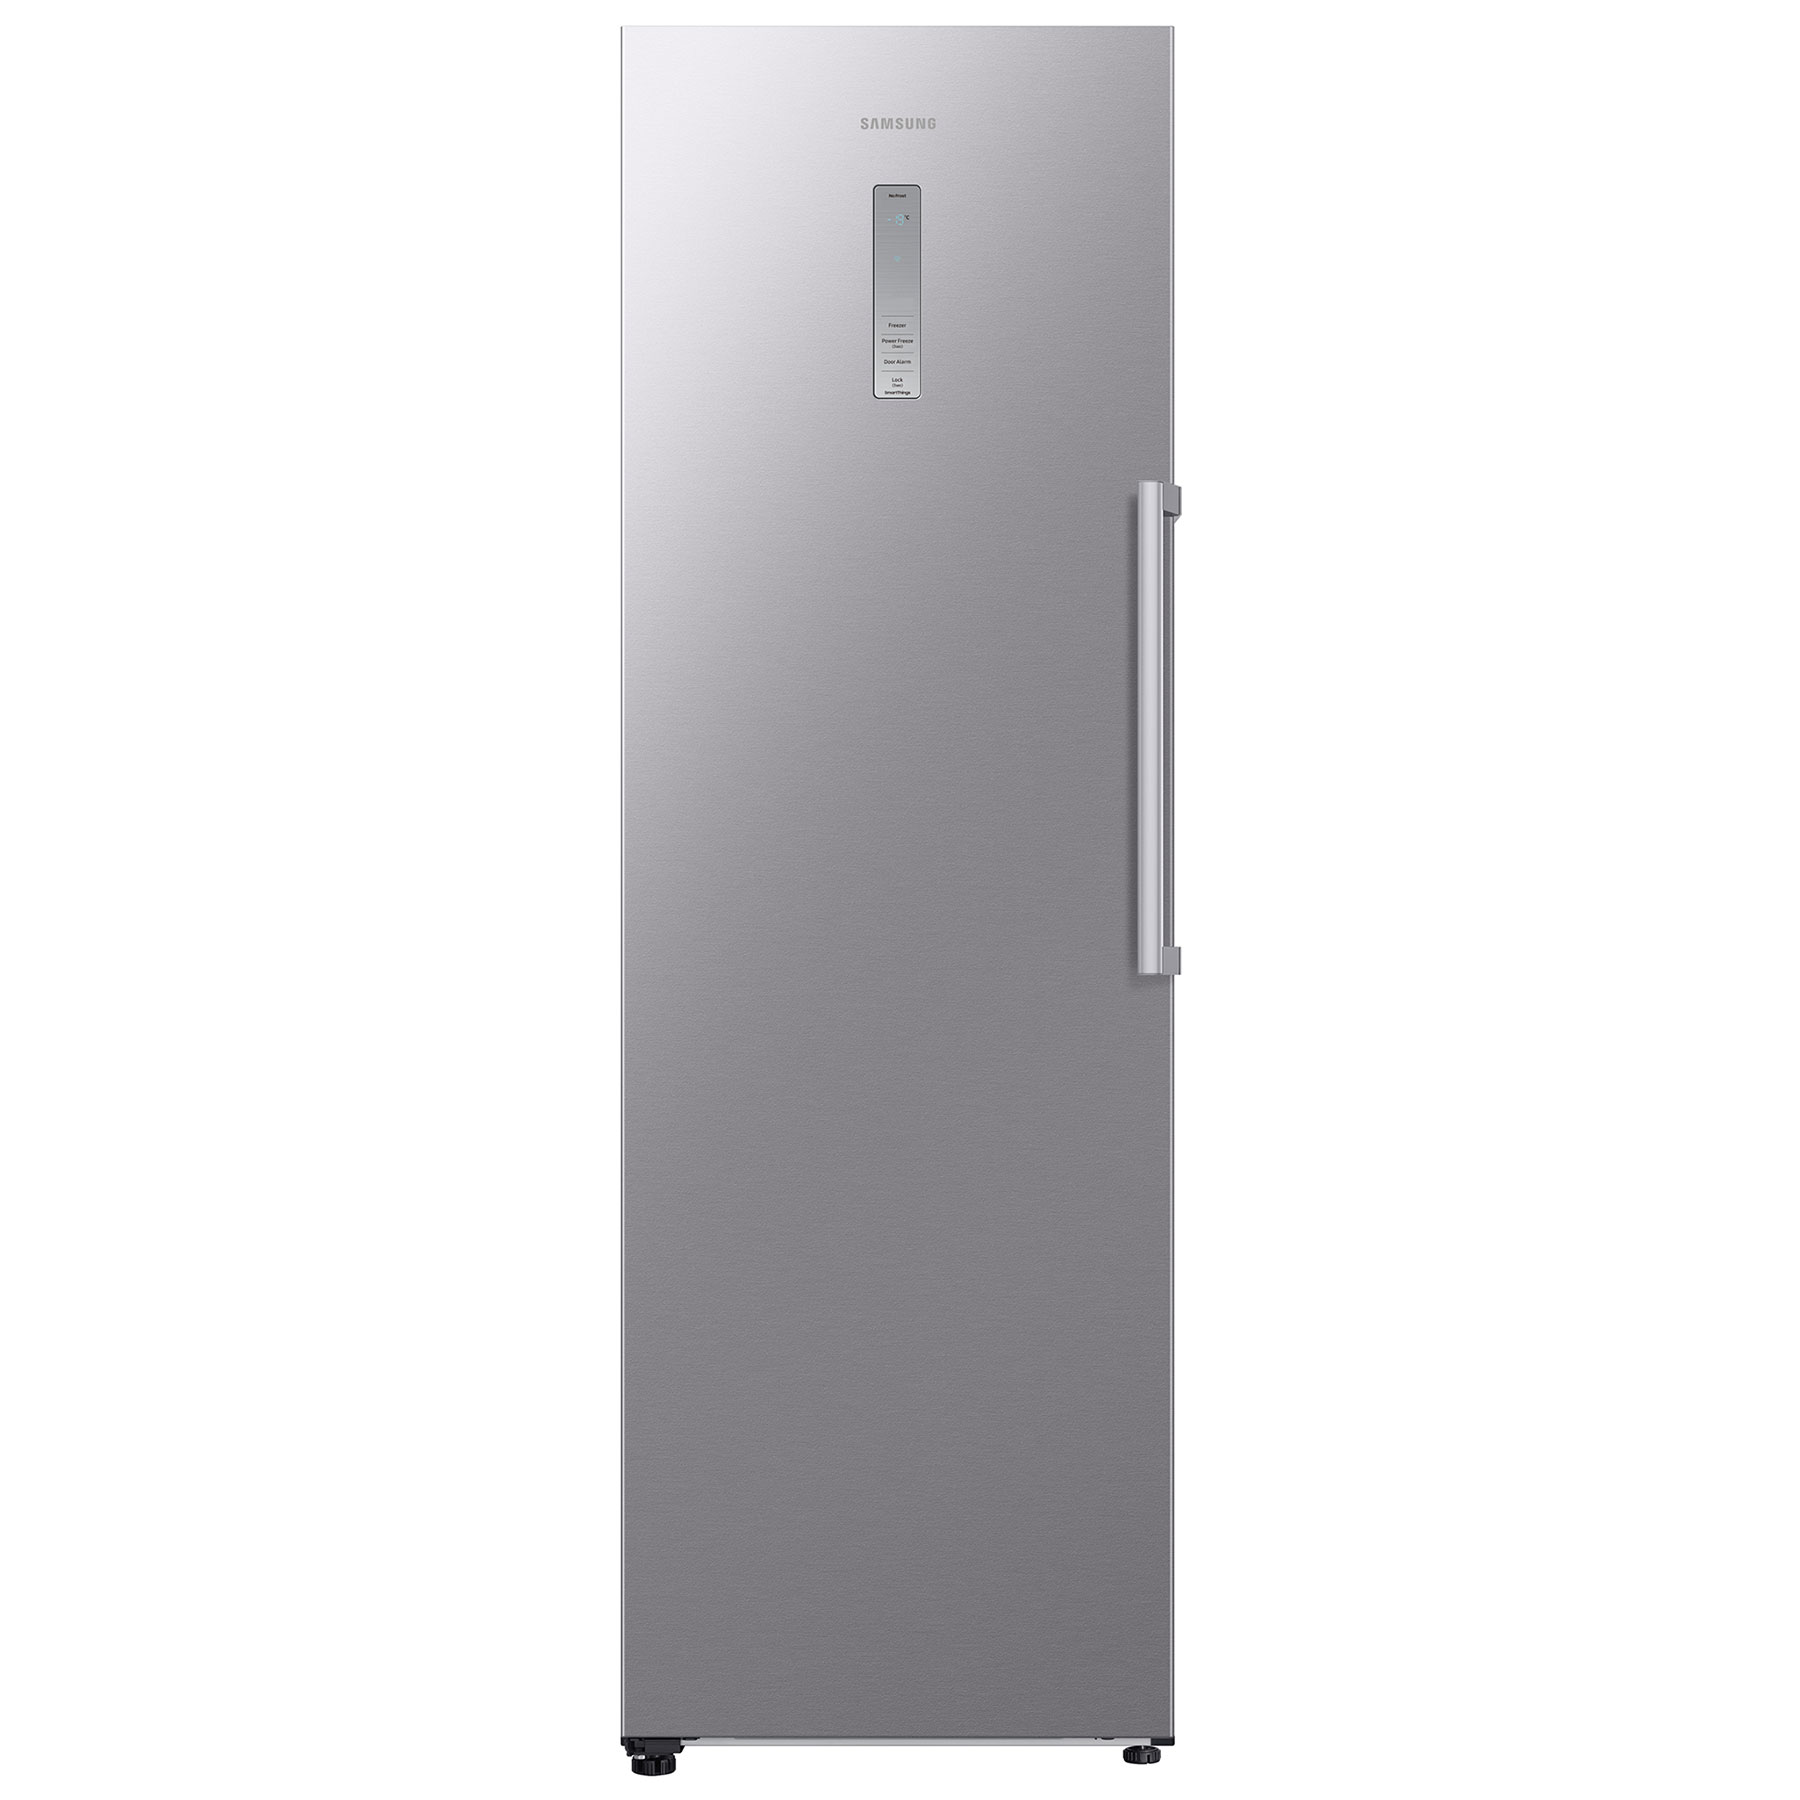 Image of Samsung RZ32C7BDESA 60cm Tall Frost Free Freezer Silver 1 86m E Rated